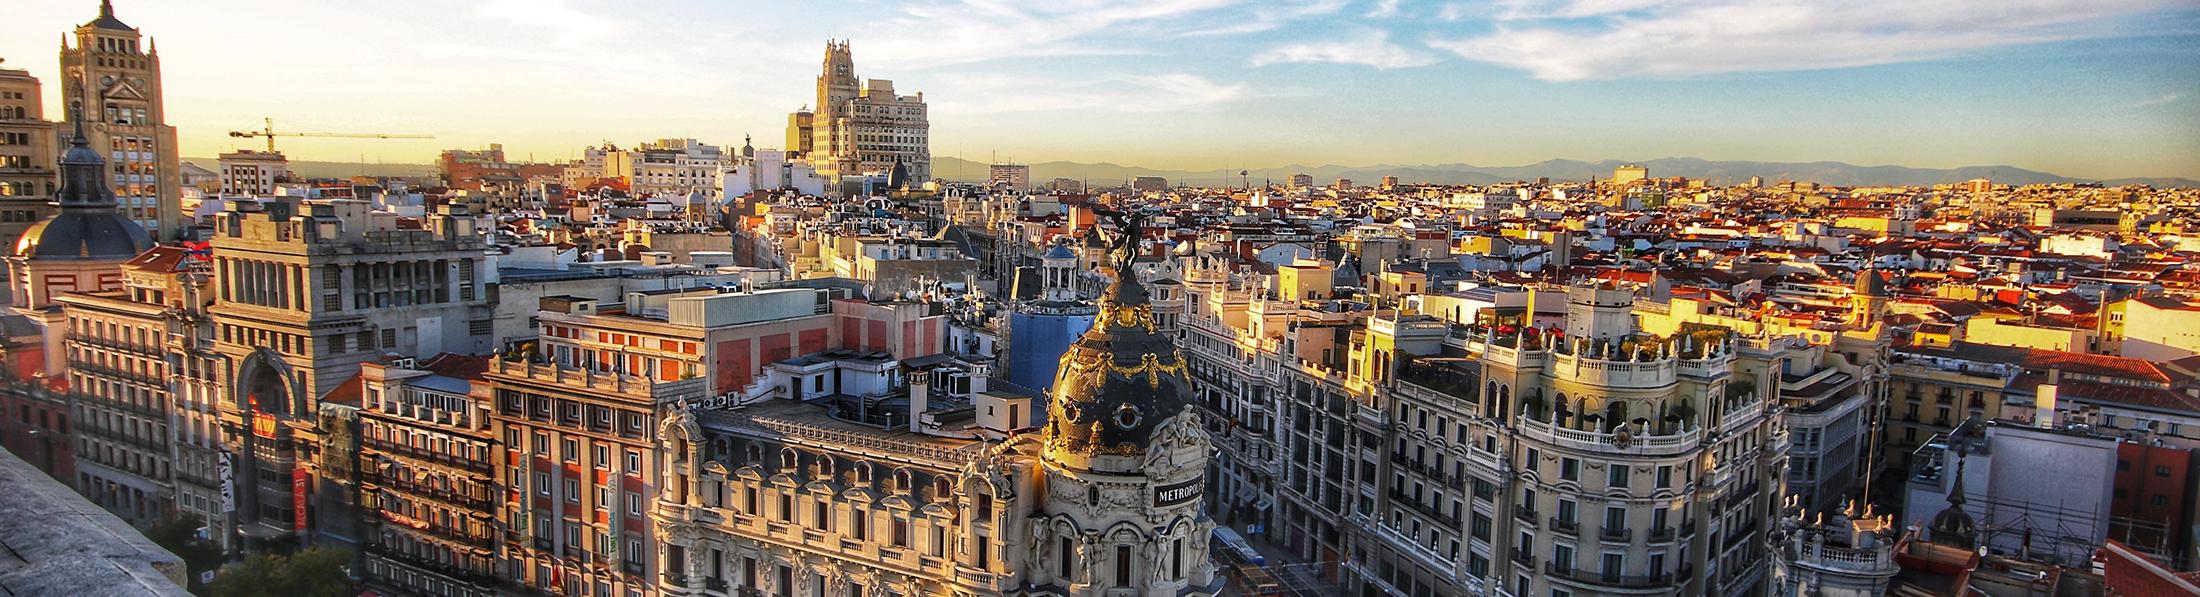 Training courses in Madrid - Spain